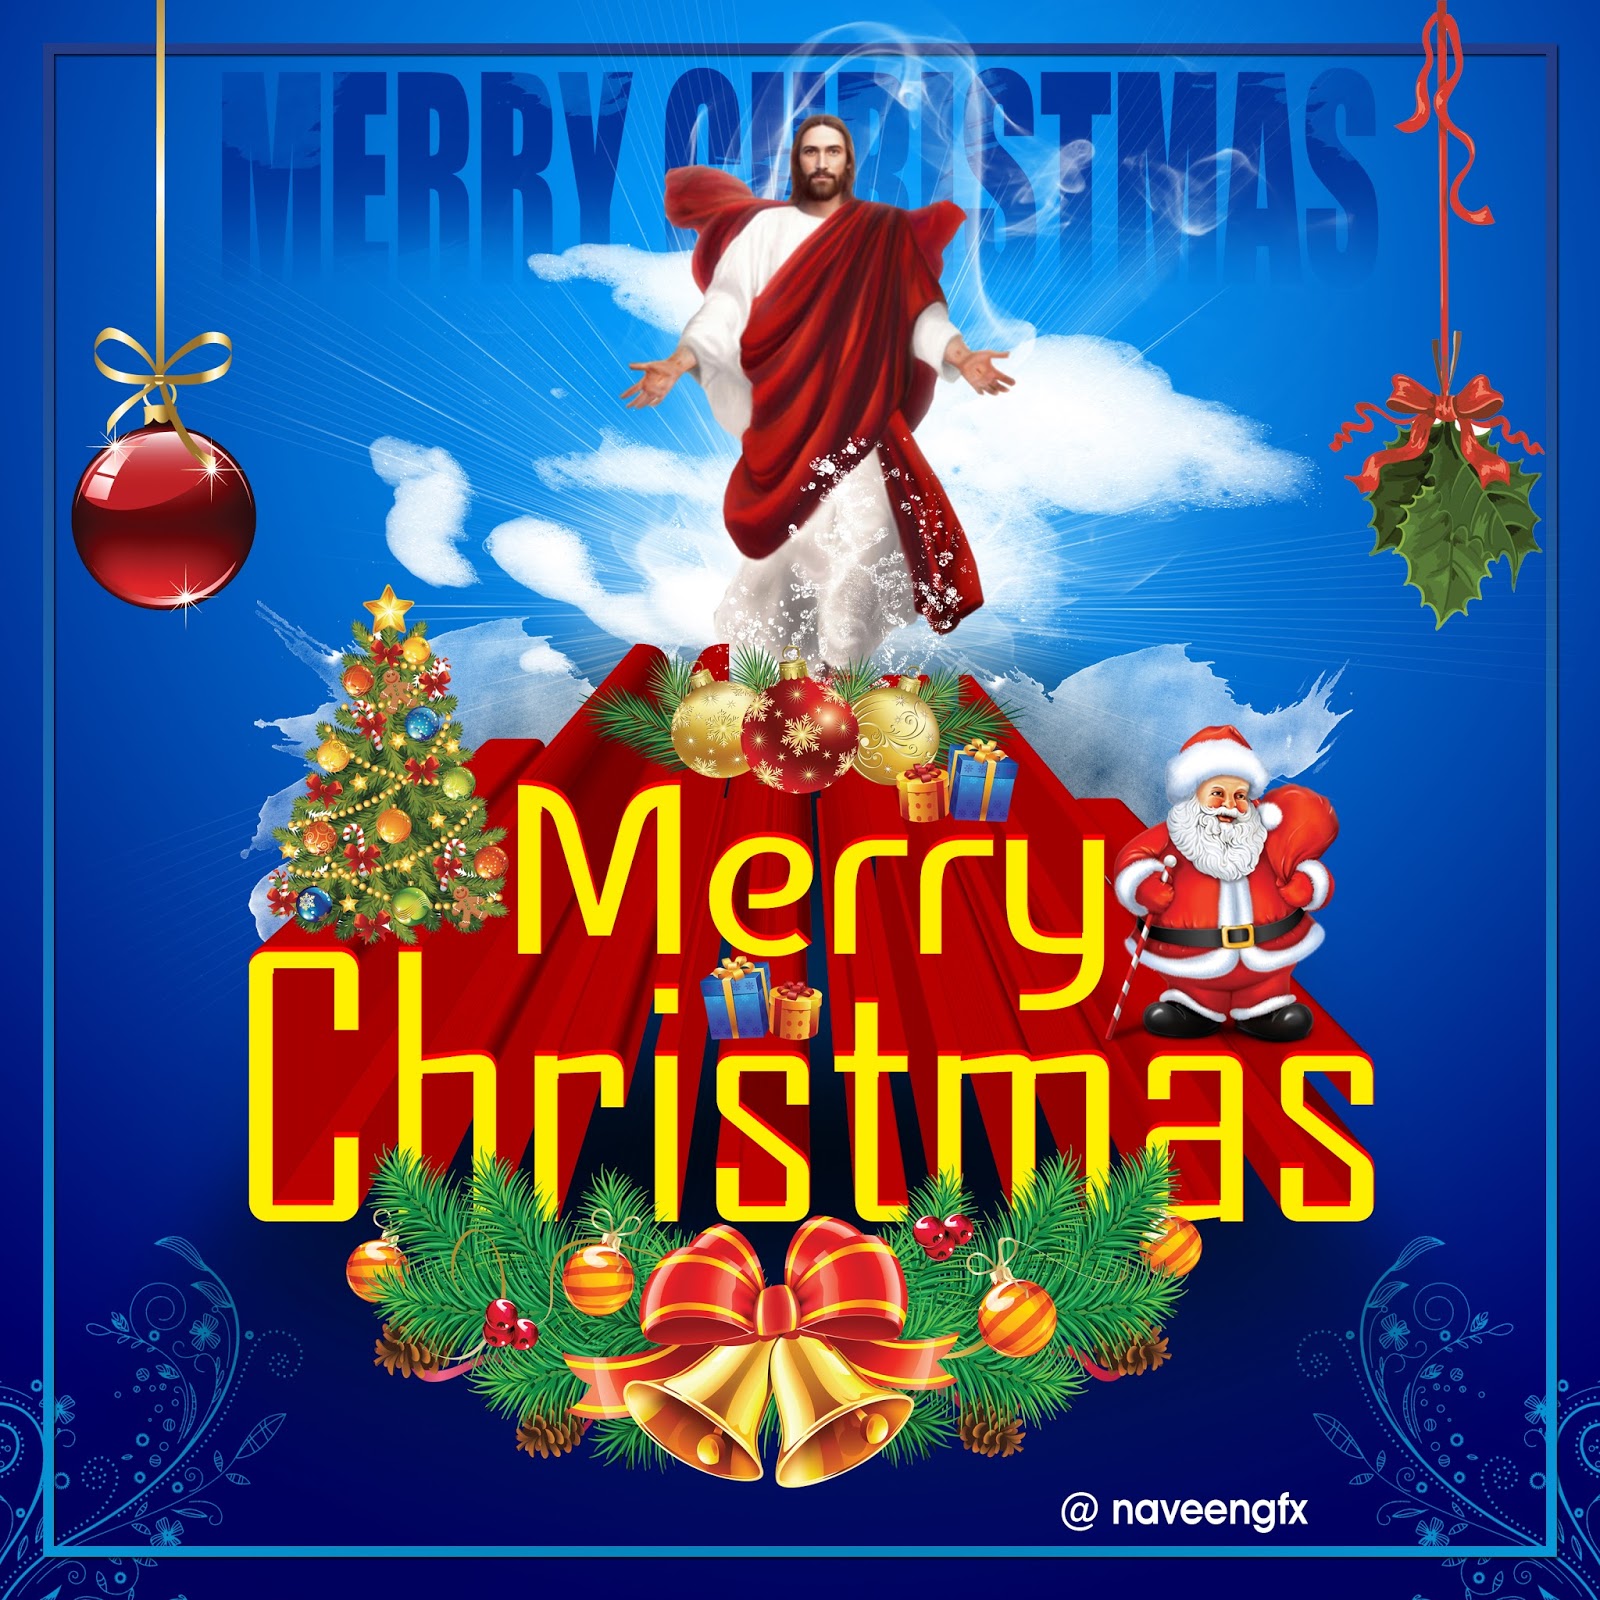 Happy christmas ecards and greetings 3d psd background free downloads | naveengfx